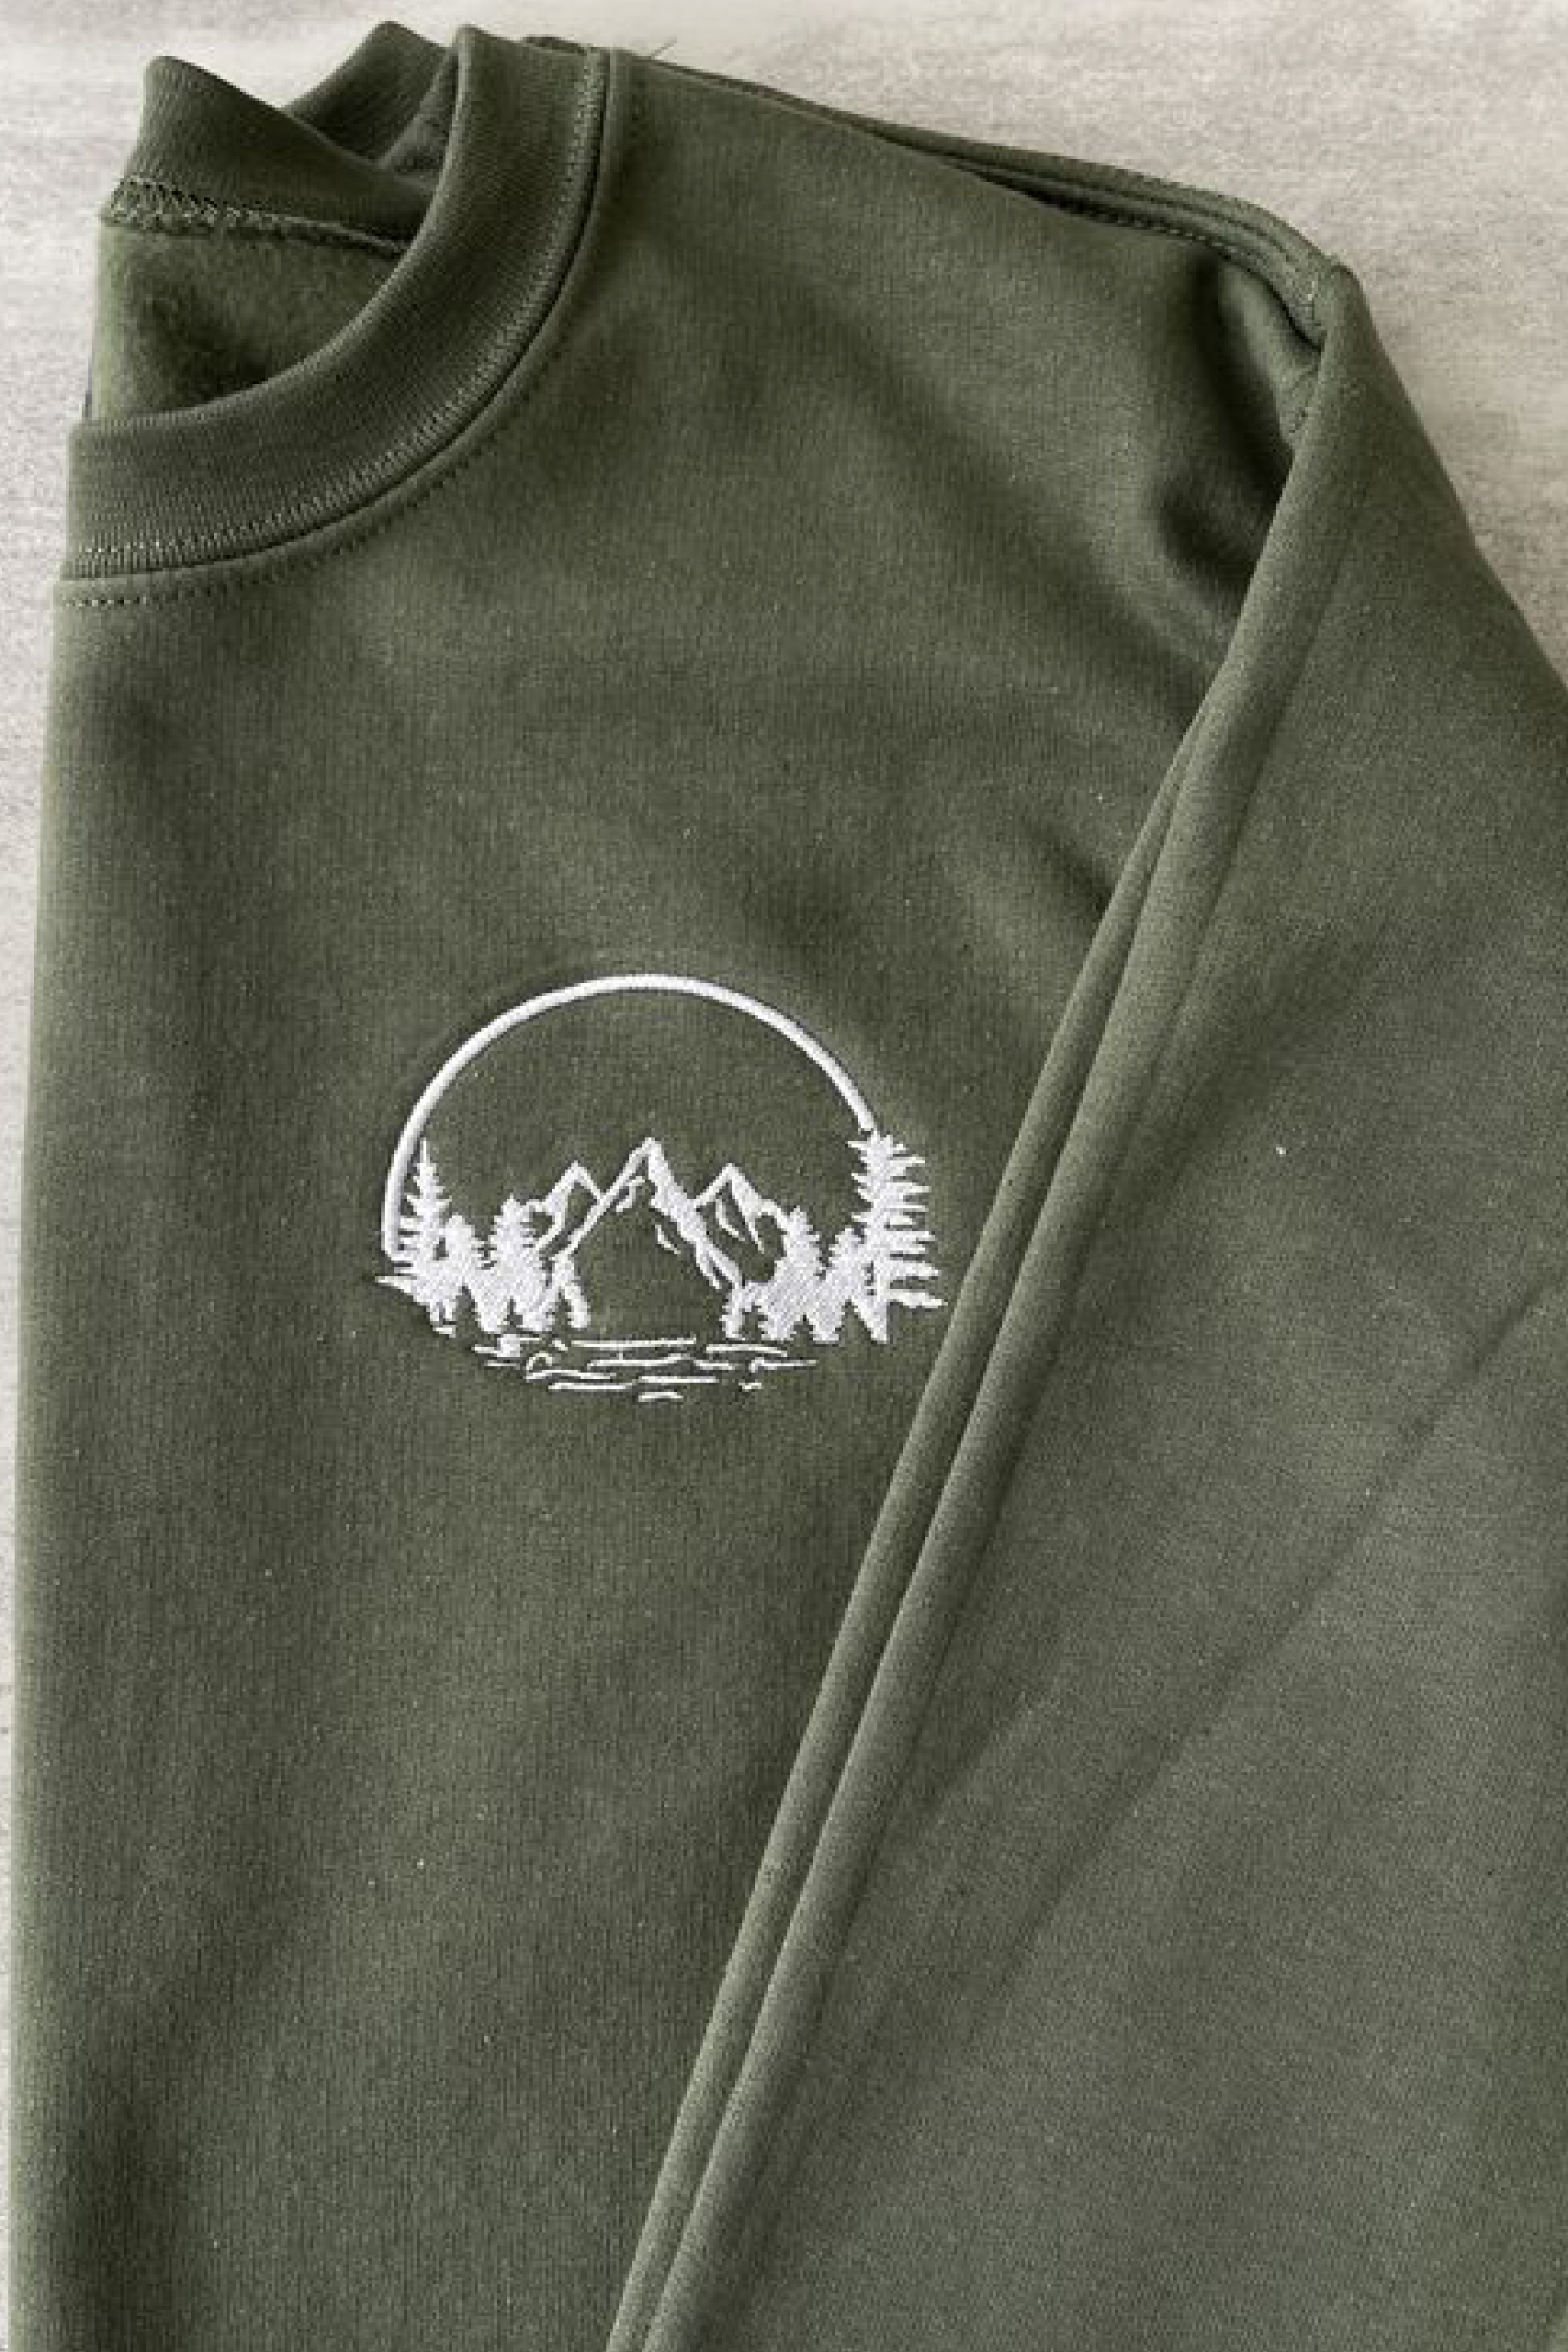 Trees and Mountain Sweatshirt, Embroidered Mountains and Trees Sweatshirt-01